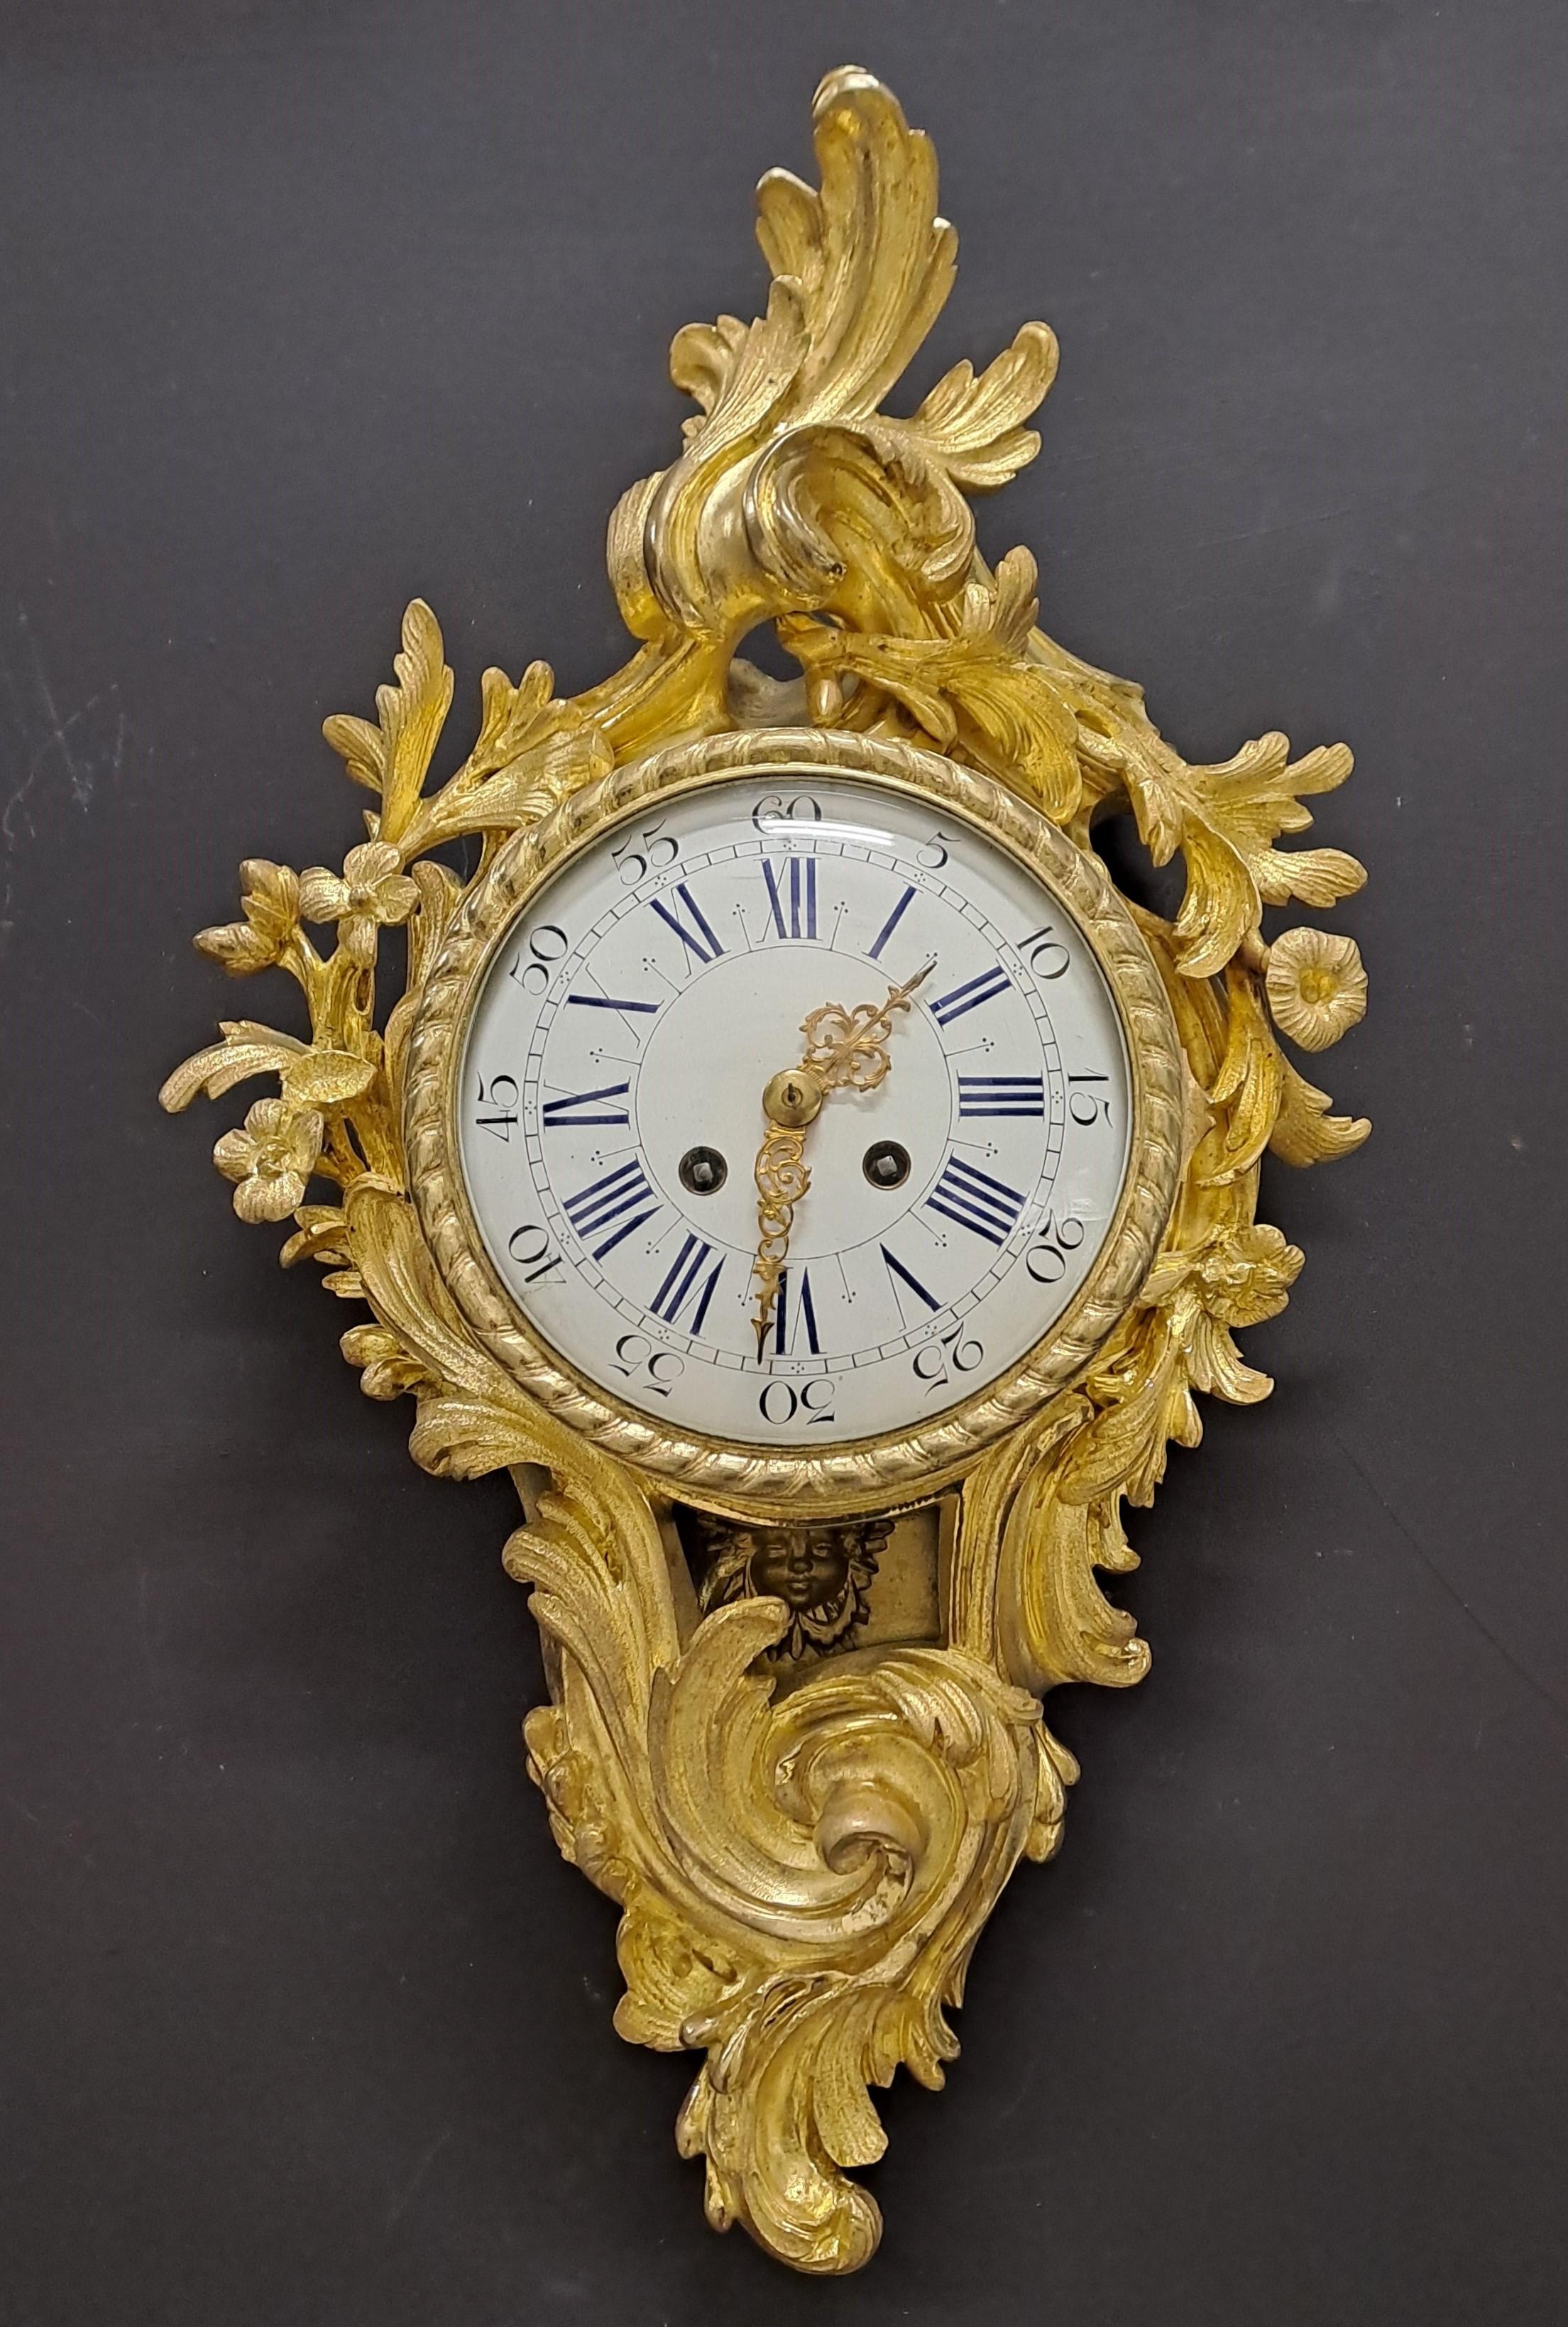 Louis XV style cartel in chiseled and gilded bronze with rococo-inspired decoration composed of scrolls, foliage and flowers.
Large white enameled dial.
Movement from Japy Frères et Cie in Paris

Work of quality from the Napoleon III period

Very